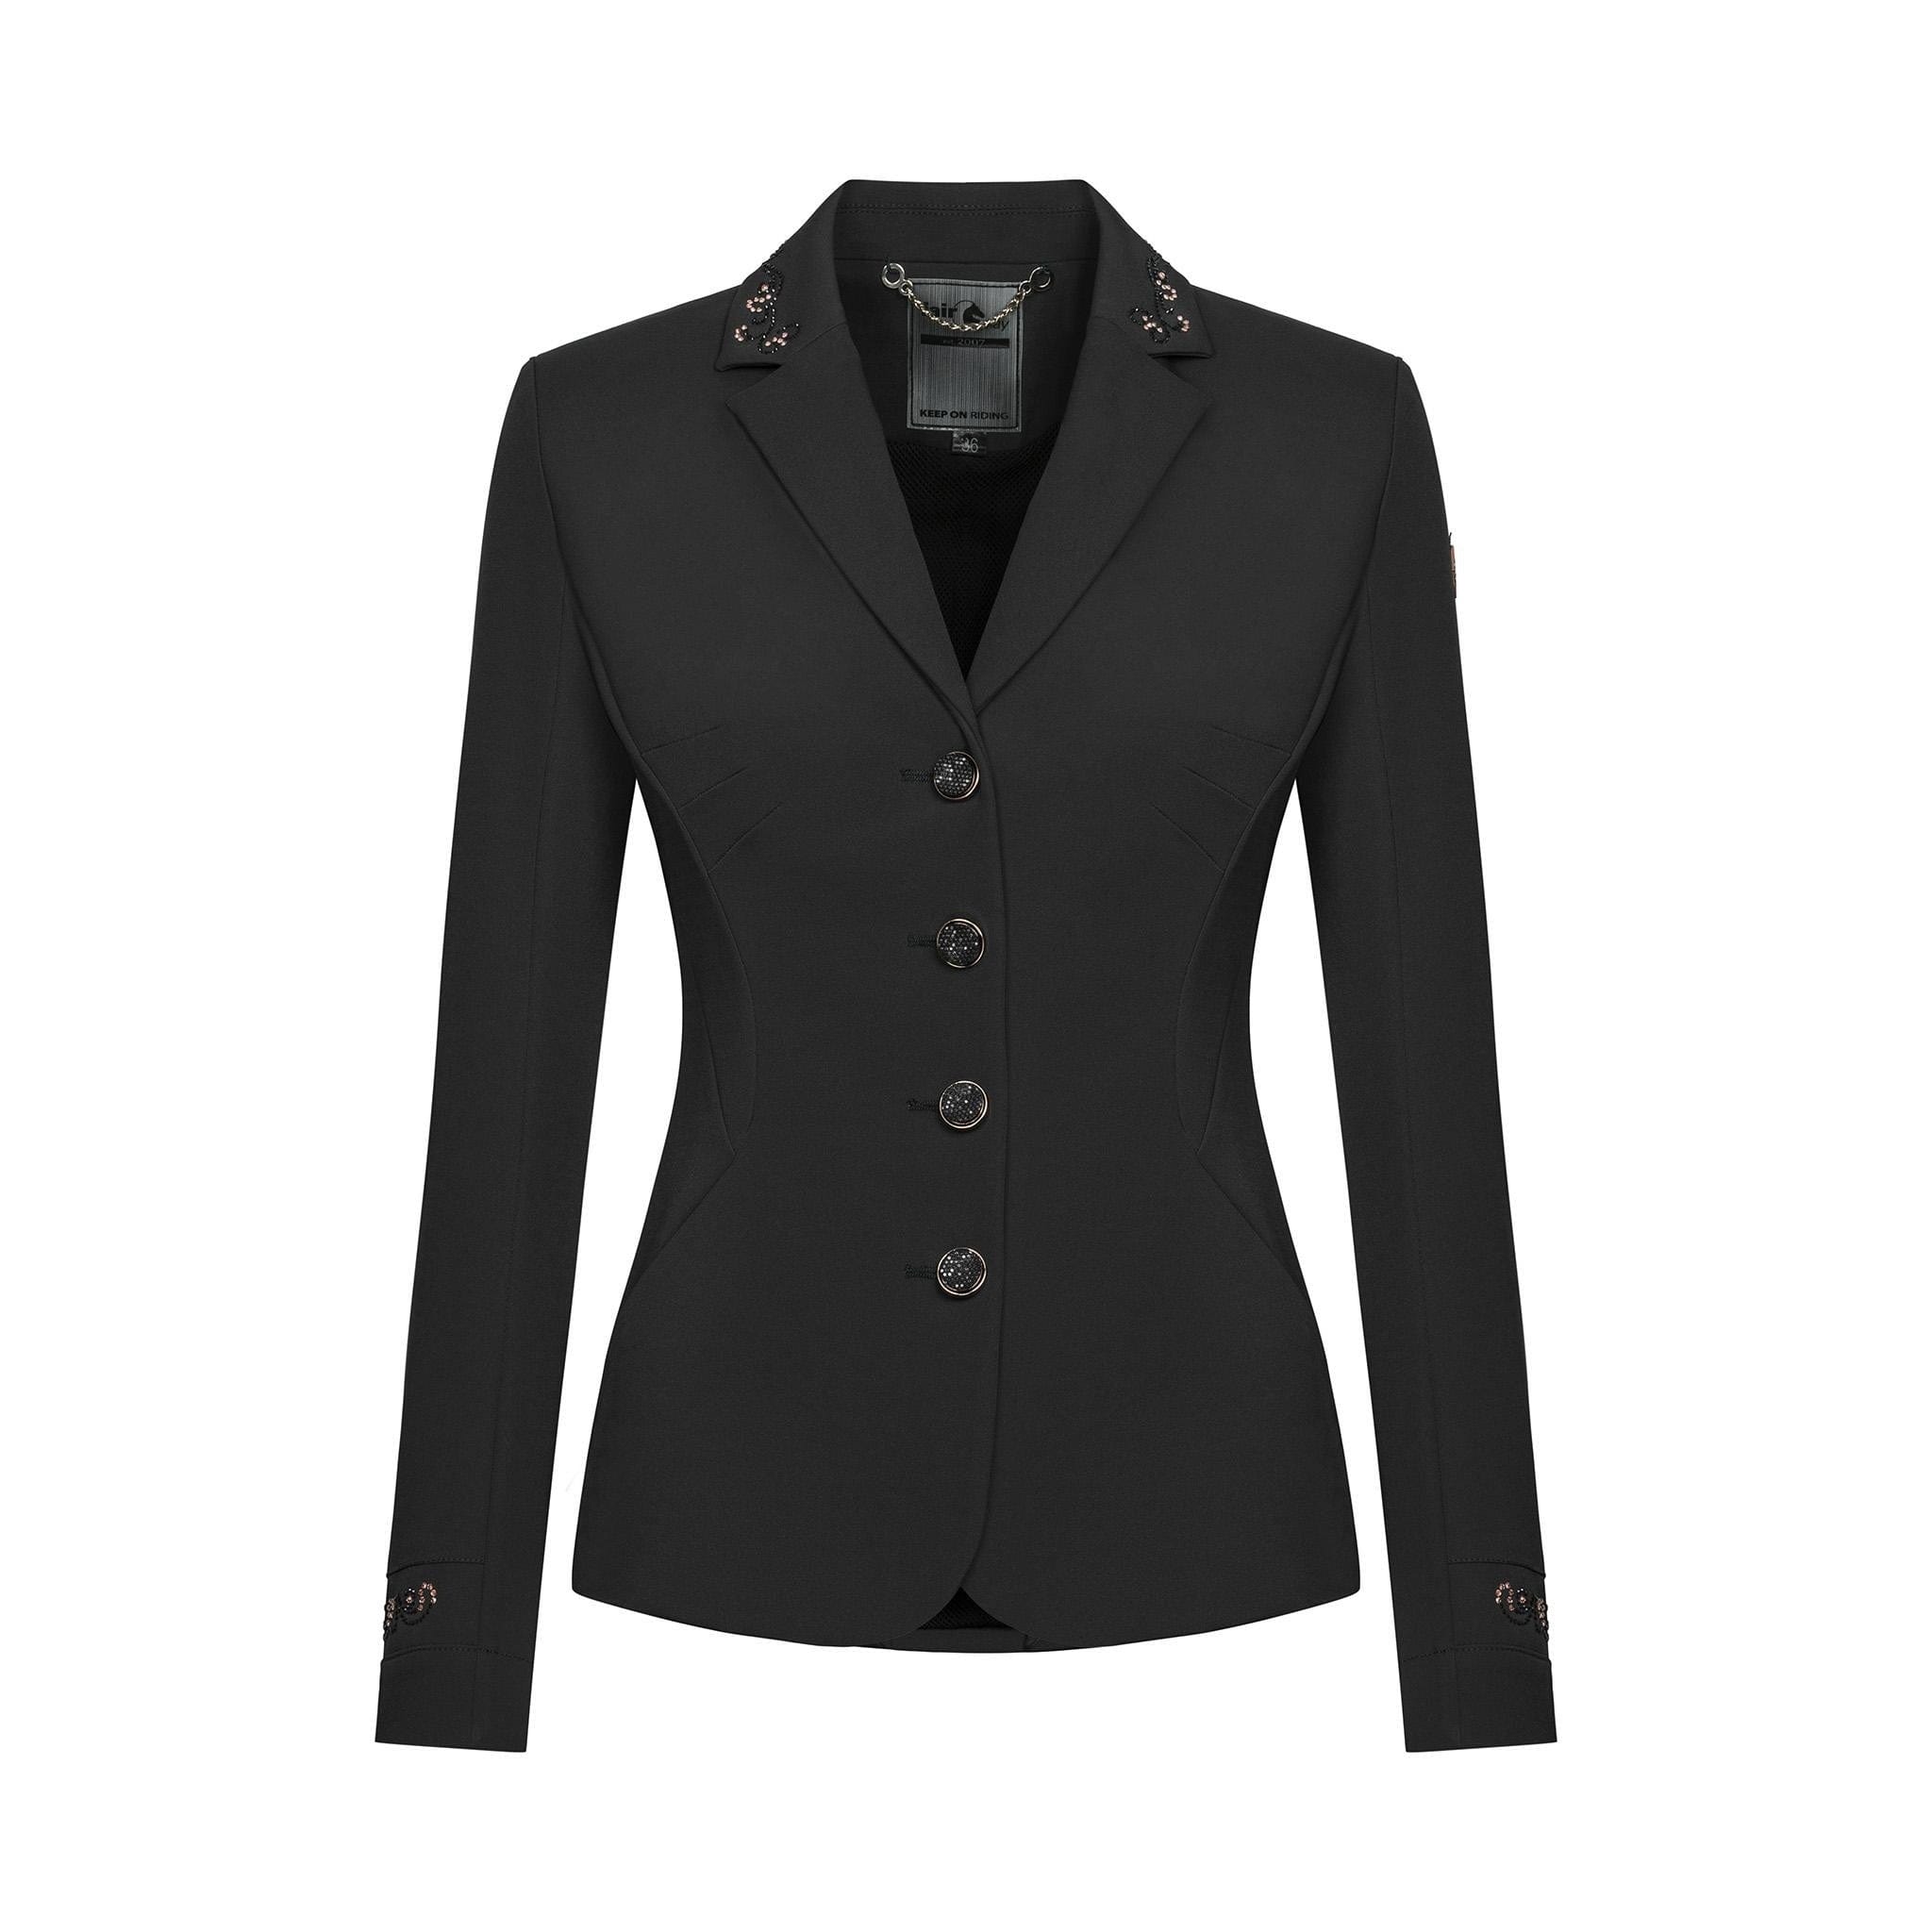 Fair Play Taylor Chic Rose Gold Show Jacket Black 09836